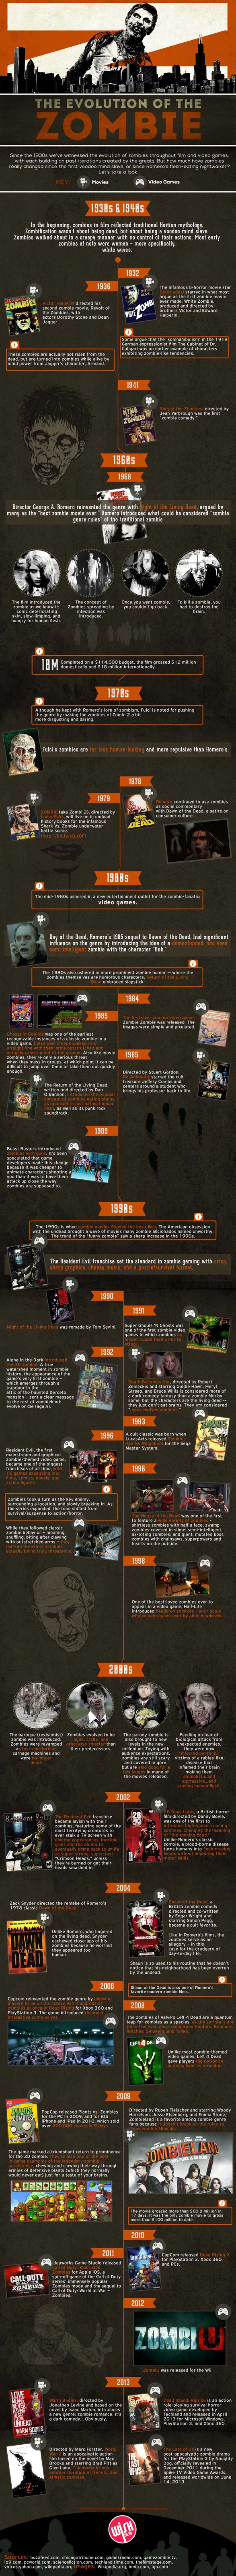 the-evolution-of-the-zombie-infographic_529c57b52ed59_w1500 (1)